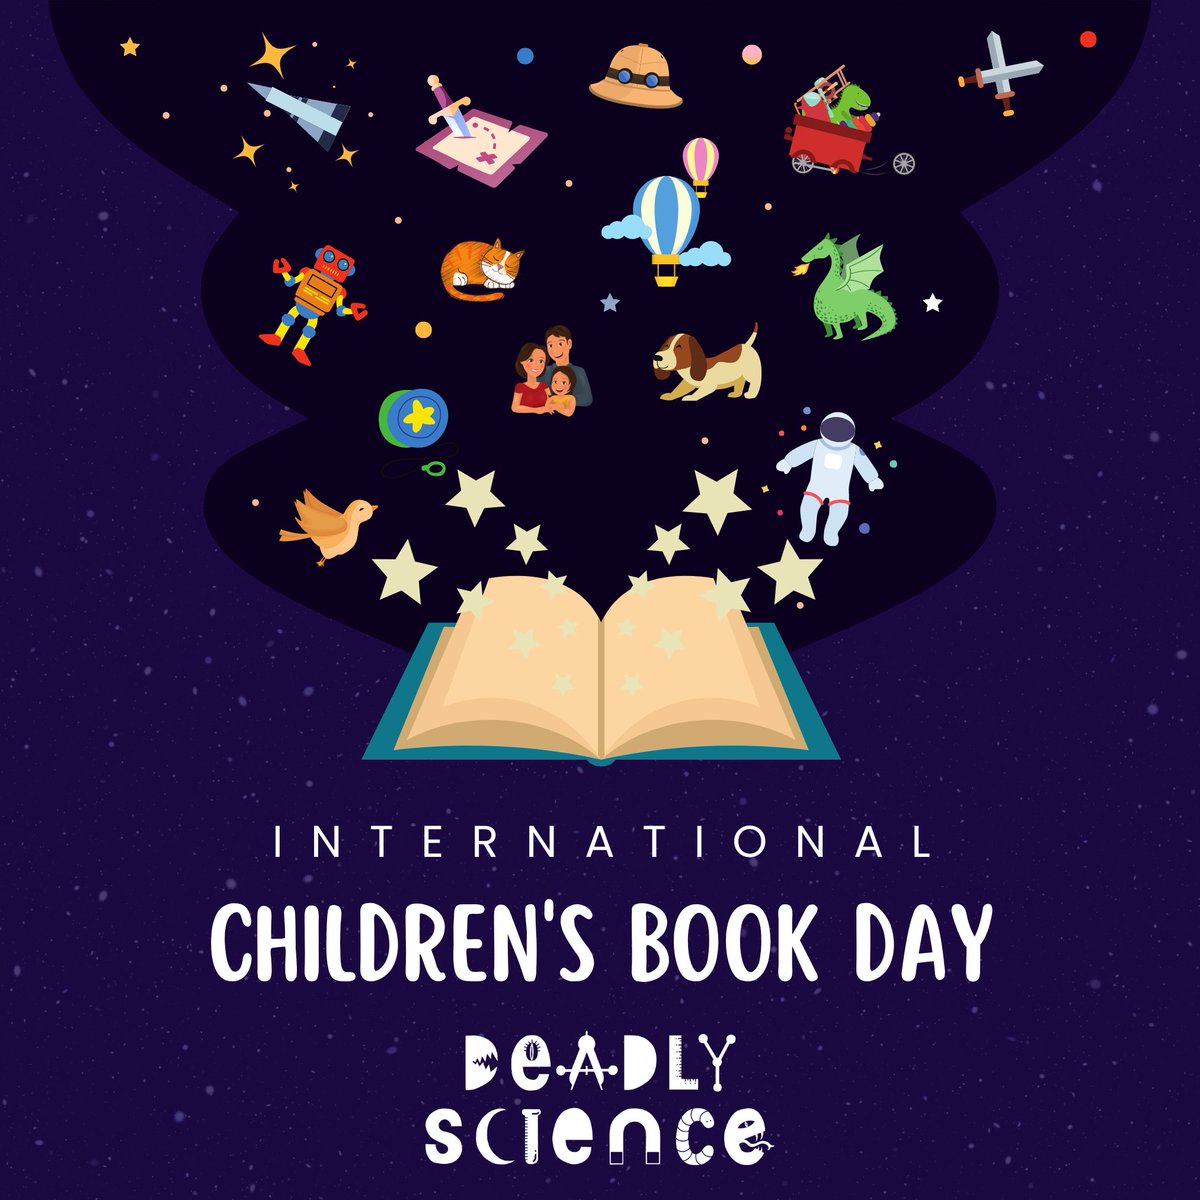 📚Happy International Children's Book Day! Today, let's celebrate the magic of storytelling and the joy of reading that captivates young minds around the world. Children's books open doors to imagination, empathy, and endless adventures. #InternationalChildrensBookDay